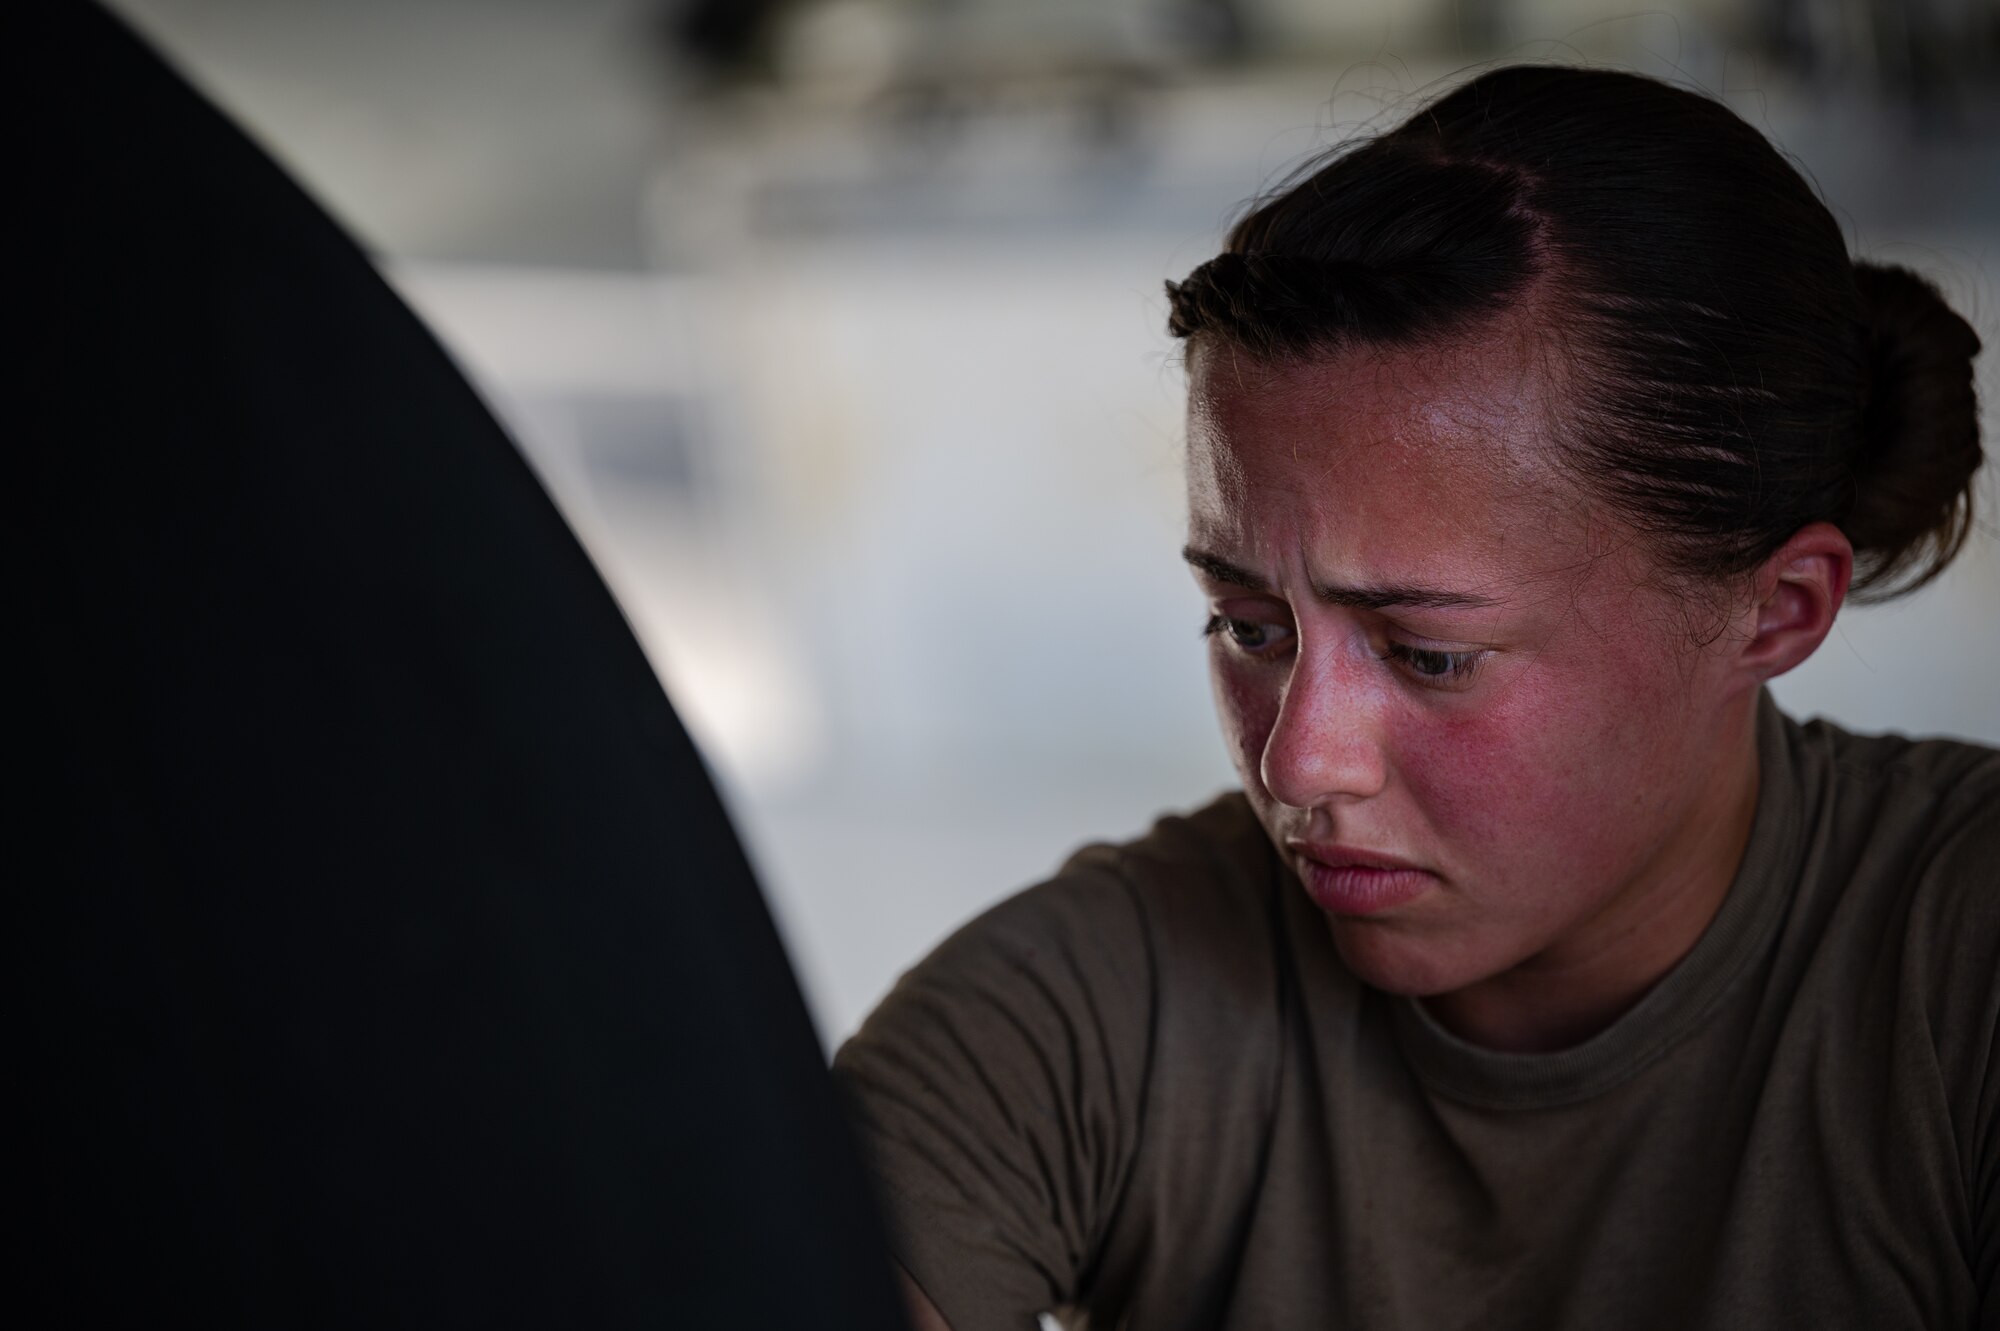 U.S. Air Force Staff Sgt. Colleen Clay, 961st Aircraft Maintenance Unit crew chief, inspects the tire of an E-3 Sentry at Kadena Air Base, Japan, Aug. 30, 2021. The 961st AMU is critical in ensuring the E-3 Sentry is capable of delivering decisive air and cyberspace capabilities. (U.S. Air Force photo by Airman 1st Class Stephen Pulter)